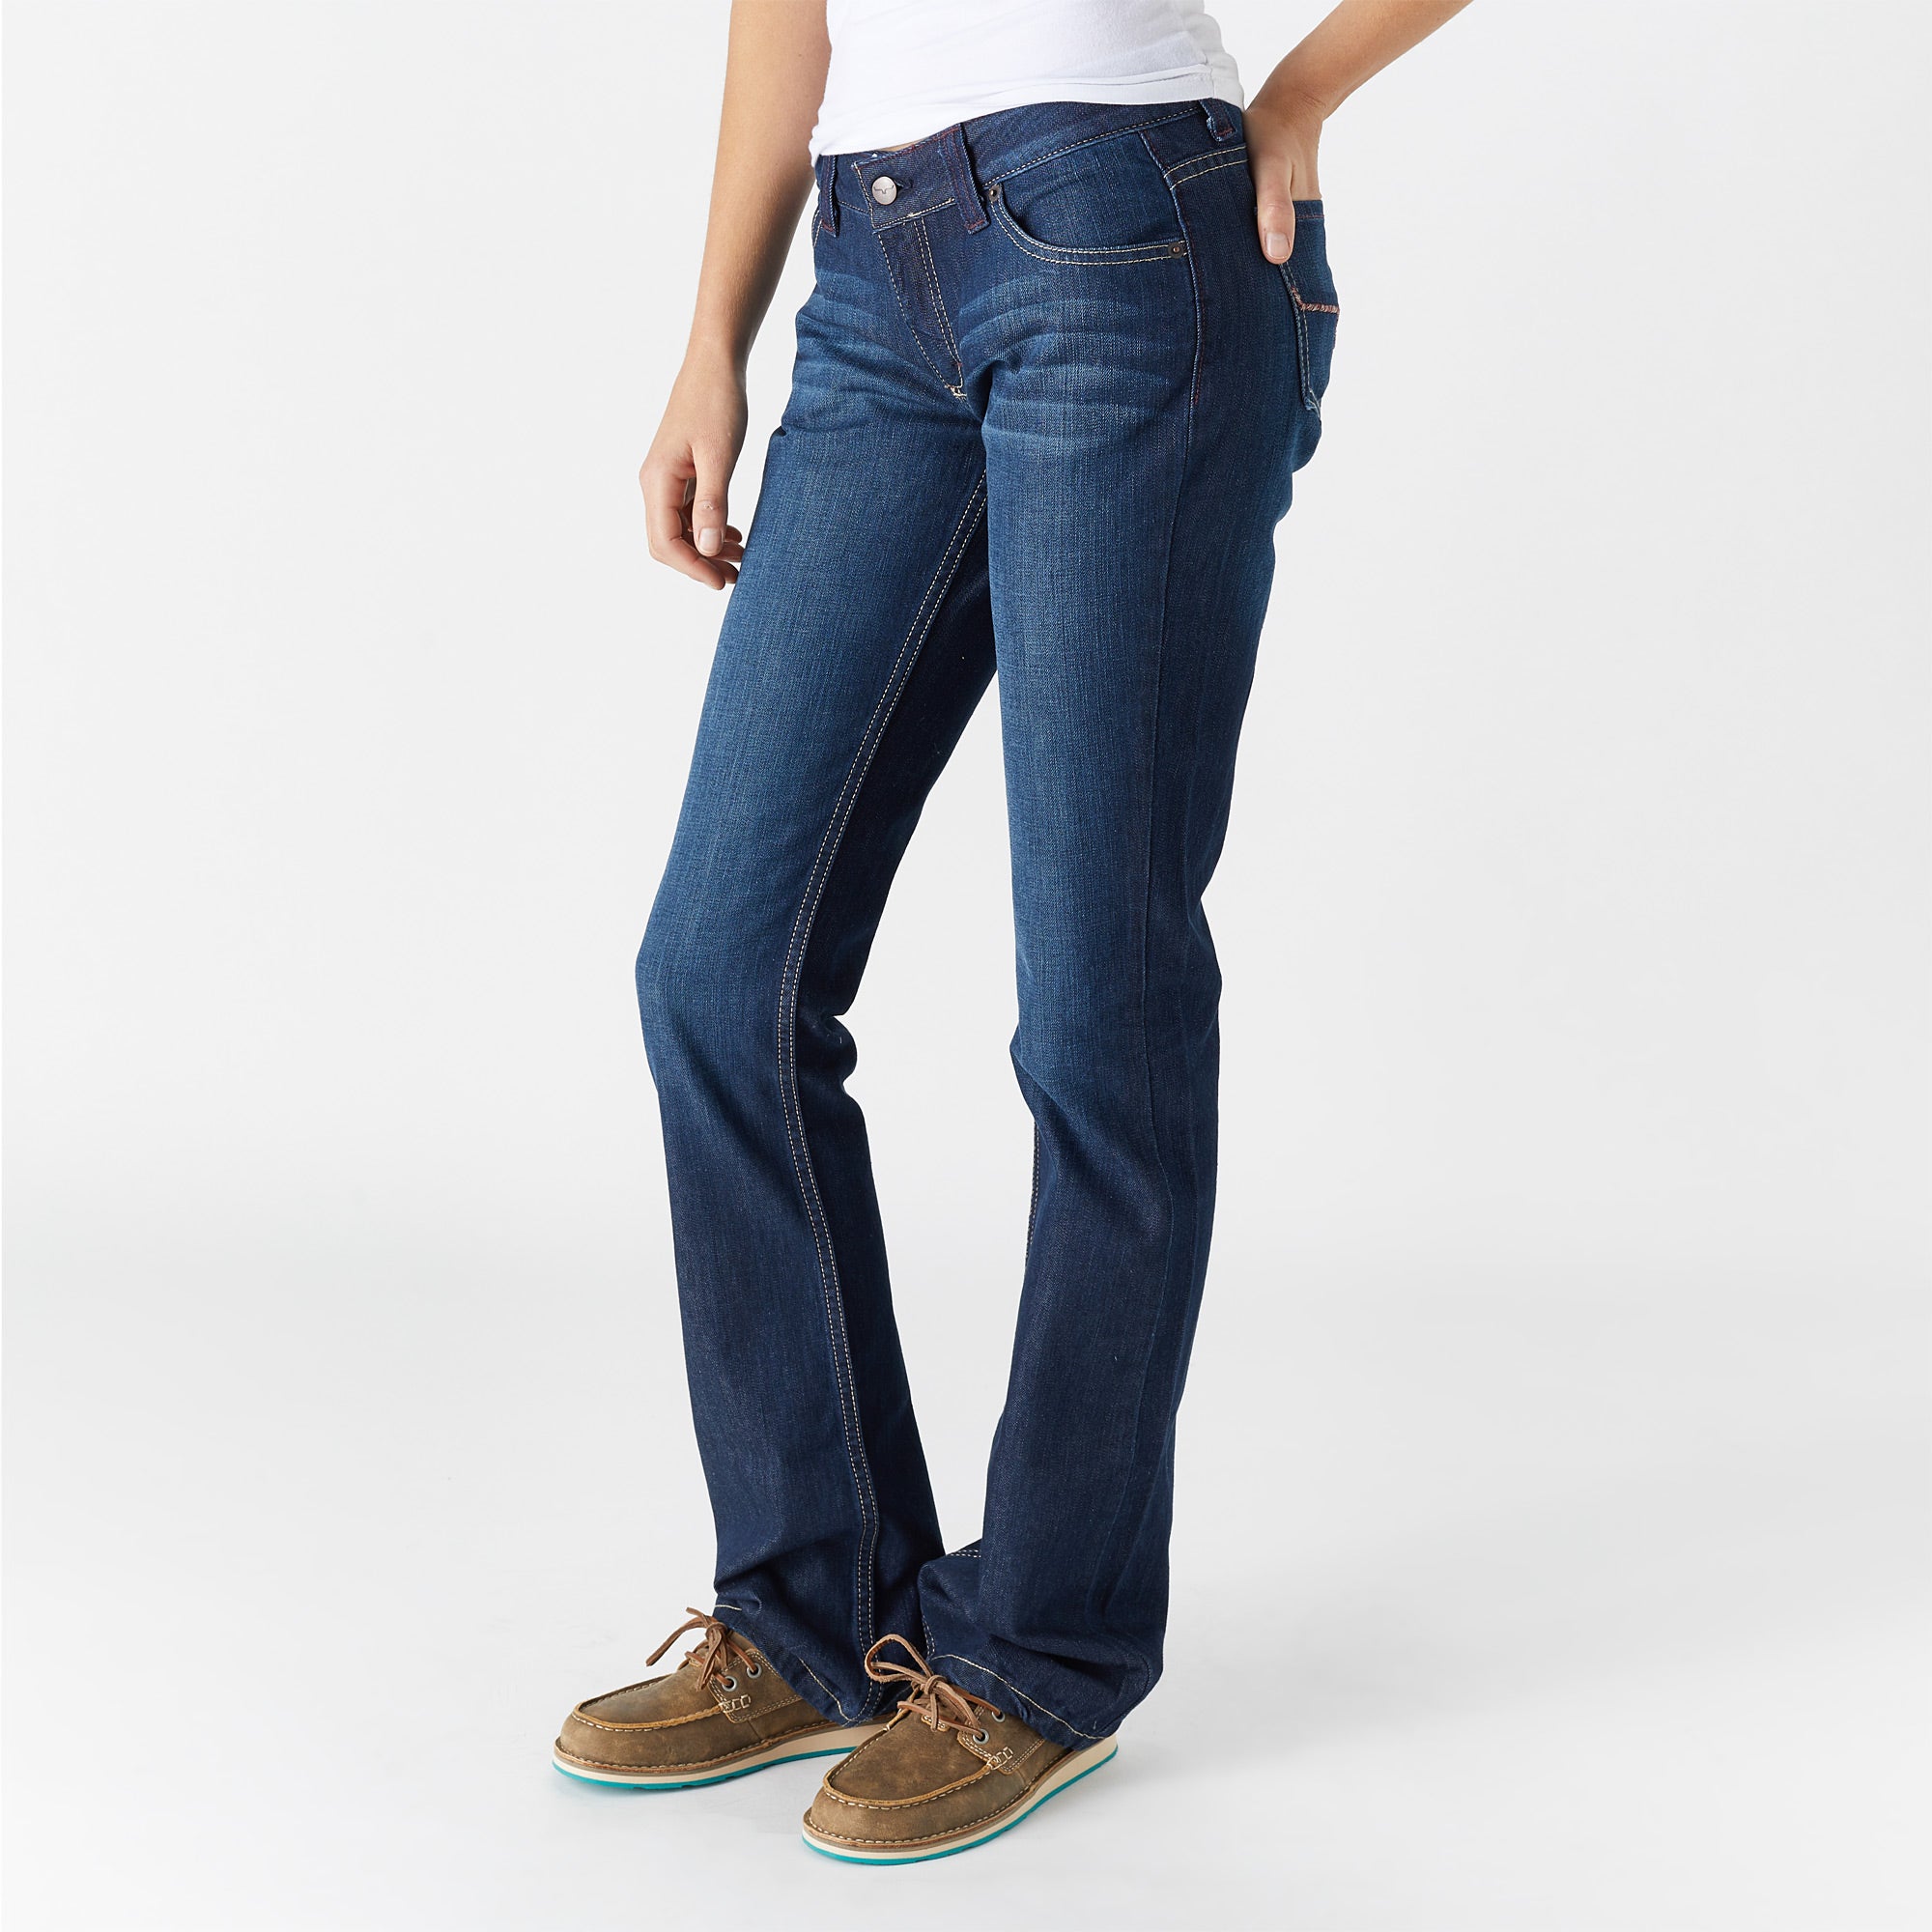 Kimes Ranch Women's Alex Relaxed Fit Jeans